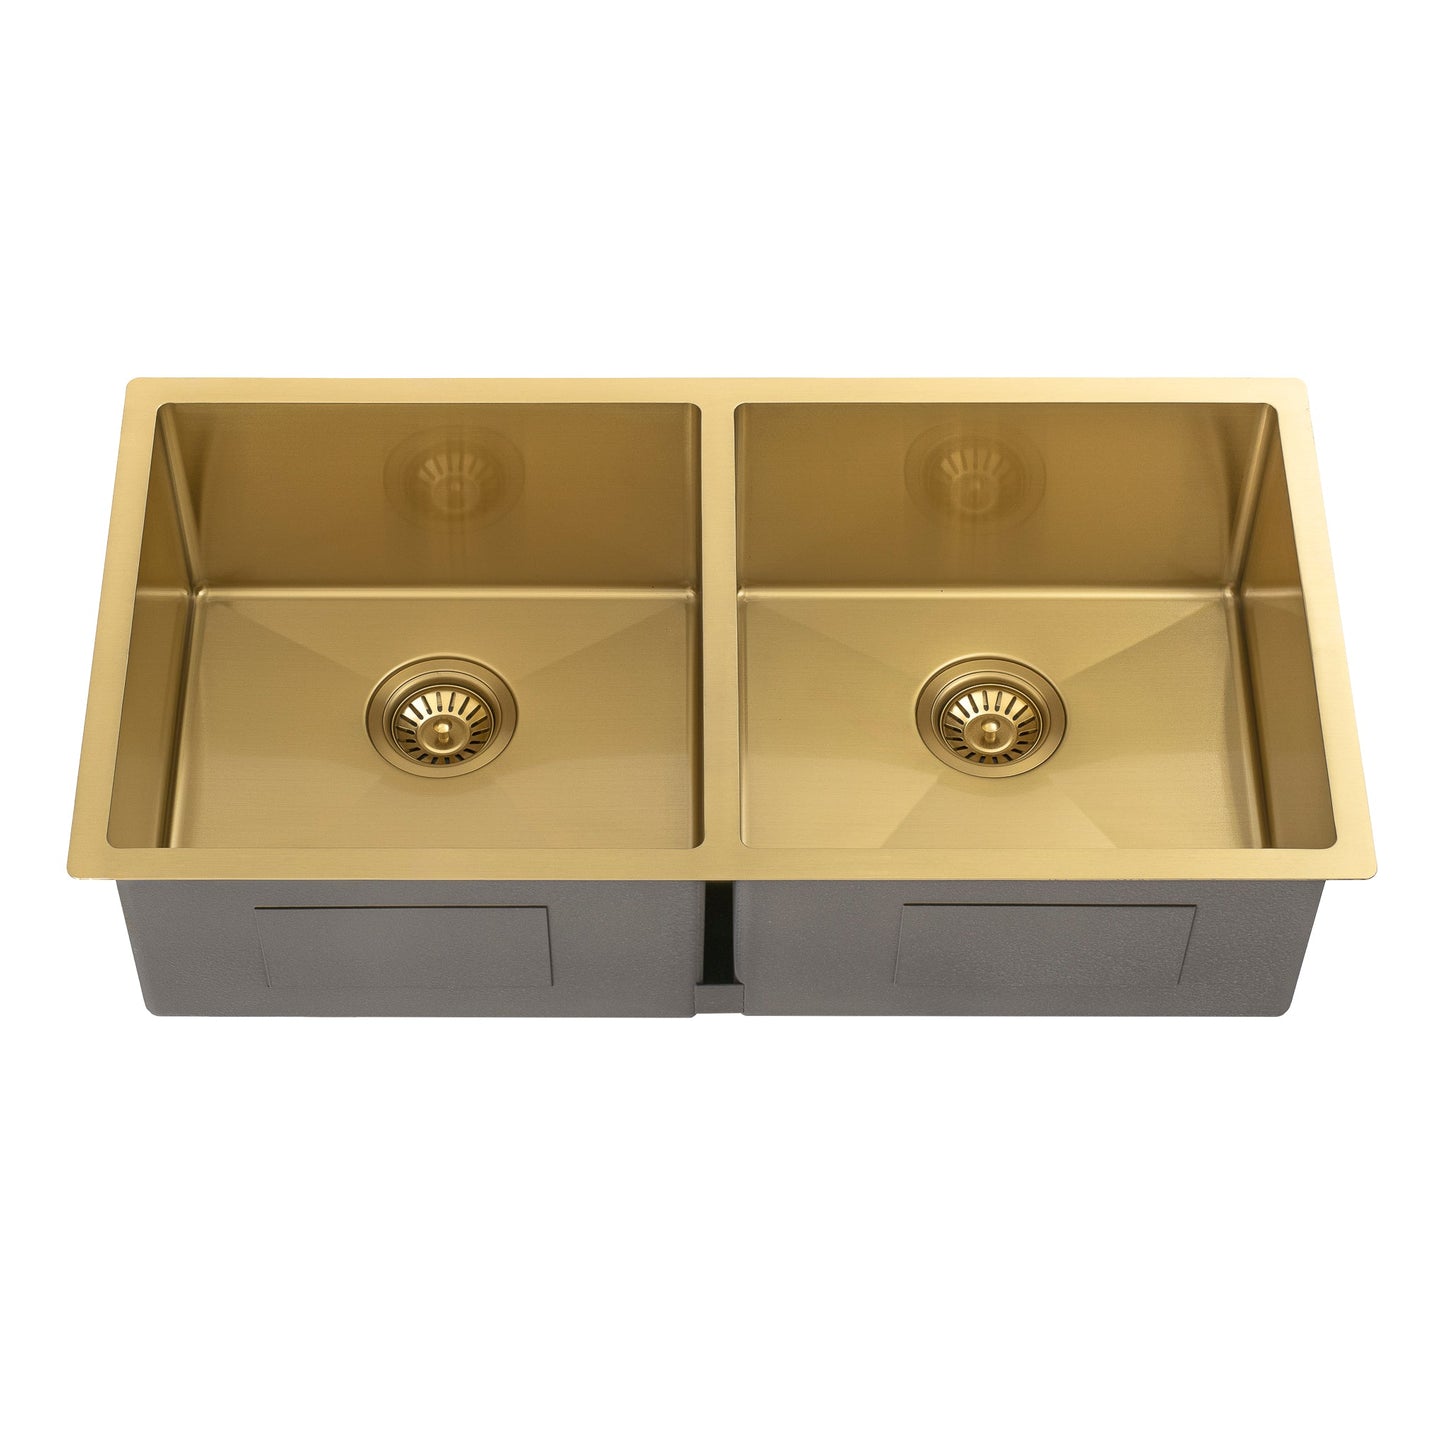 Retto II 875mm x 450mm x 230mm Stainless Steel Double Sink, Brushed Brass Gold